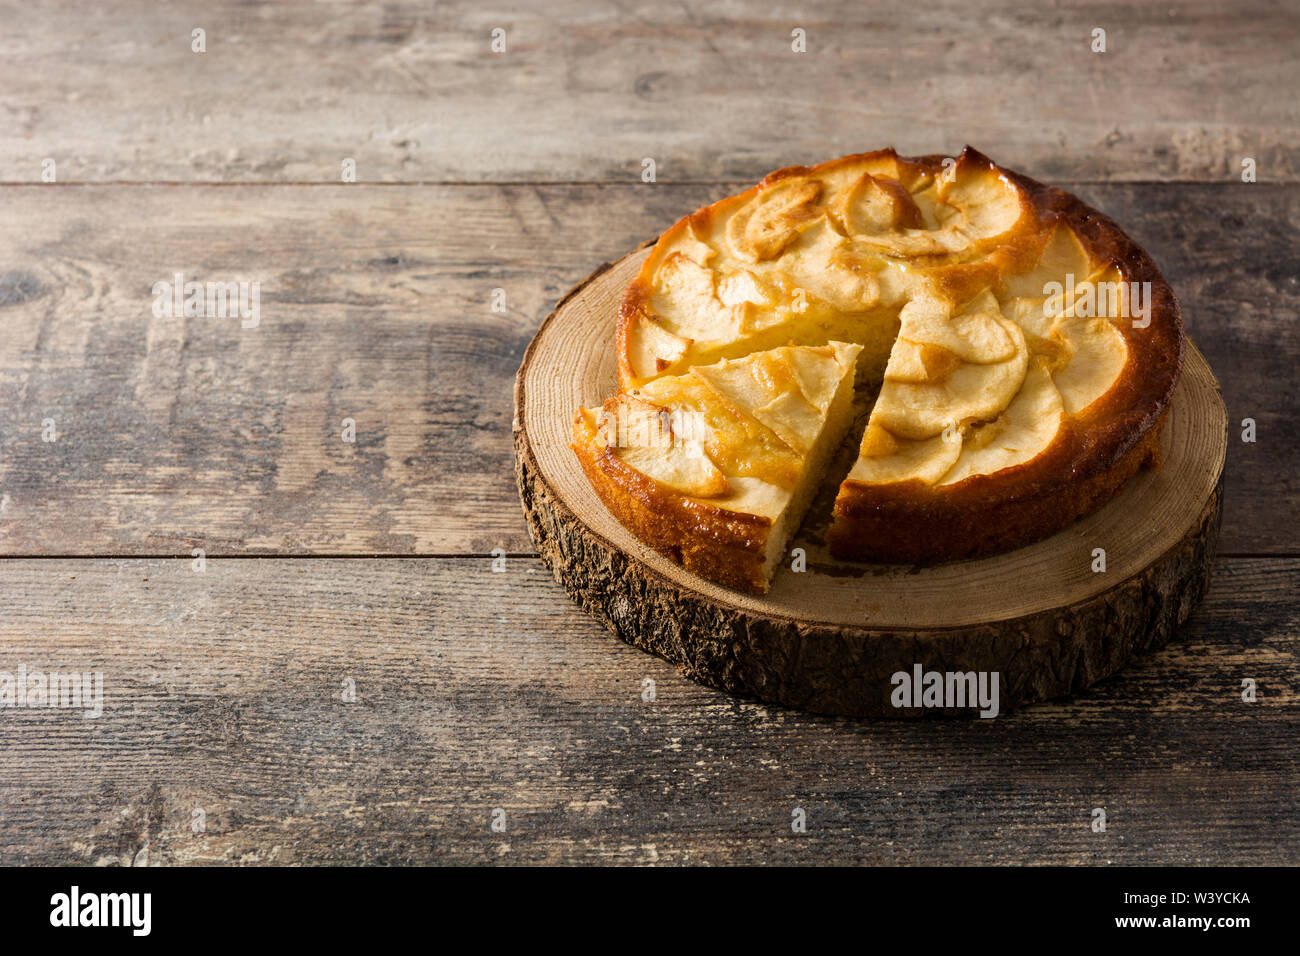 Homemade apple pie on wooden table. Copyspace Stock Photo